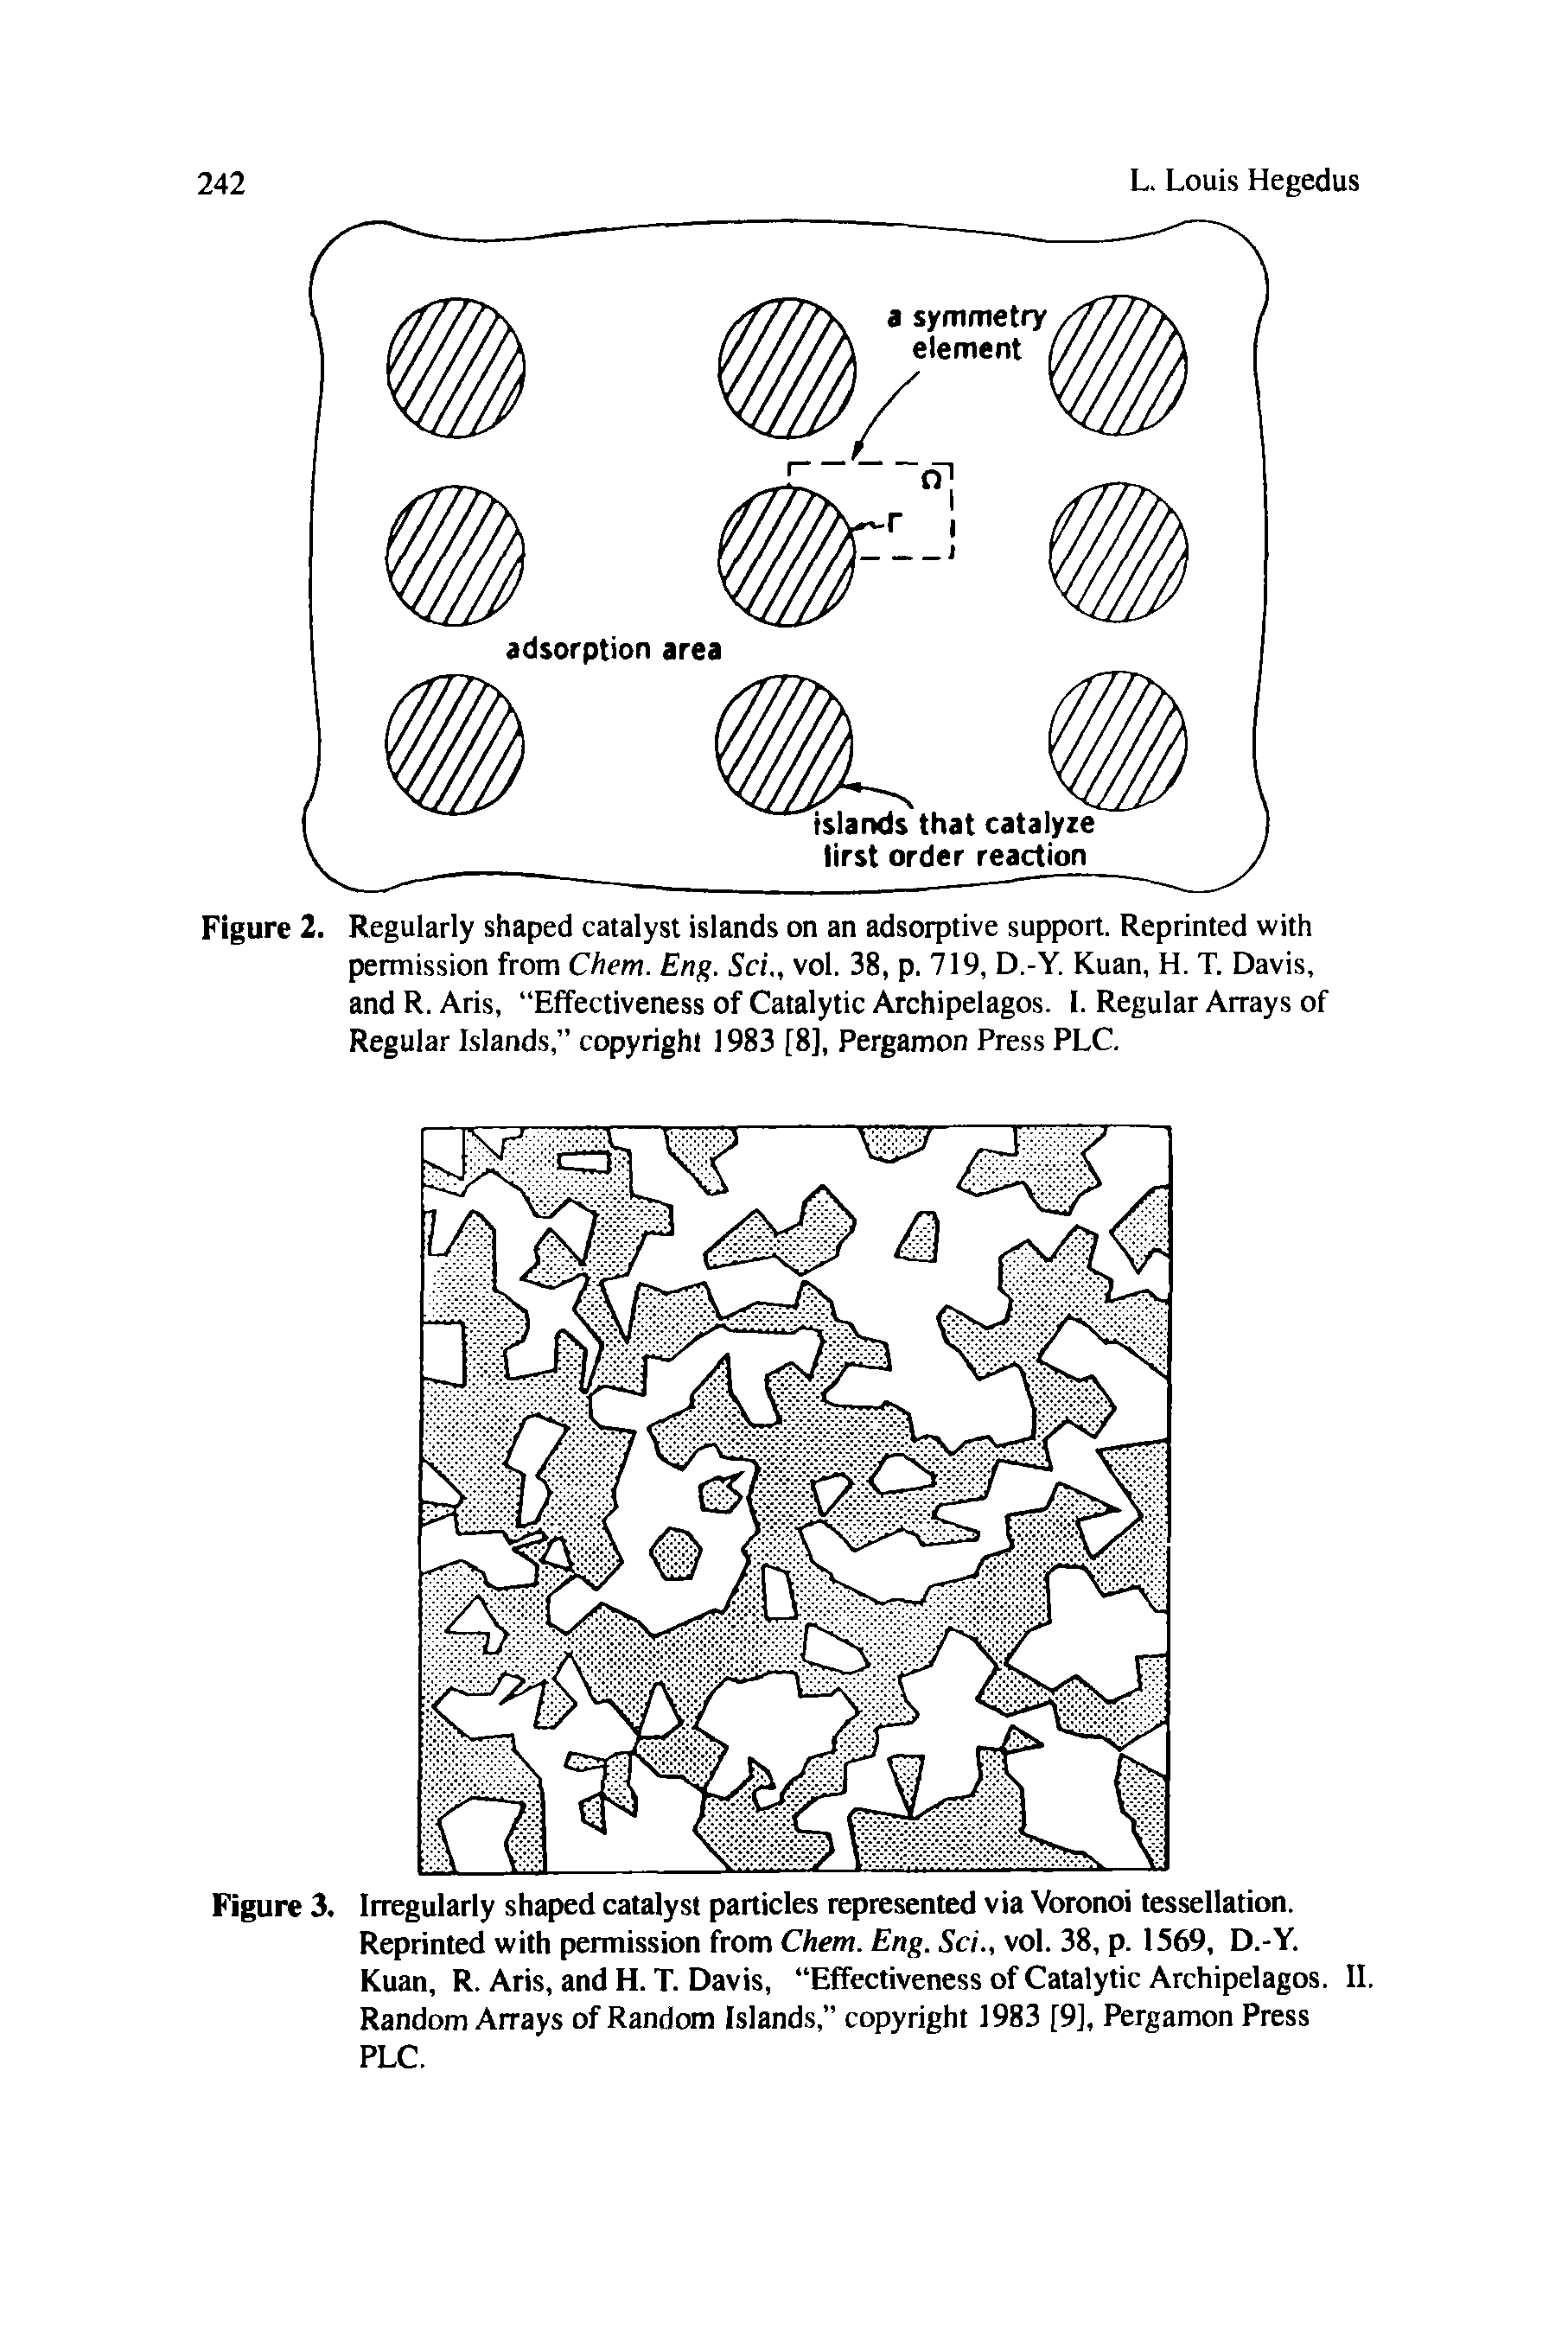 Figure 2. Regularly shaped catalyst islands on an adsorptive support. Reprinted with permission from Chem. Eng. Sci., vol. 38, p. 719, D.-Y. Kuan, H. T. Davis, and R. Aris, Effectiveness of Catalytic Archipelagos. I. Regular Arrays of Regular Islands, copyright 1983 [8], Pergamon Press PLC.